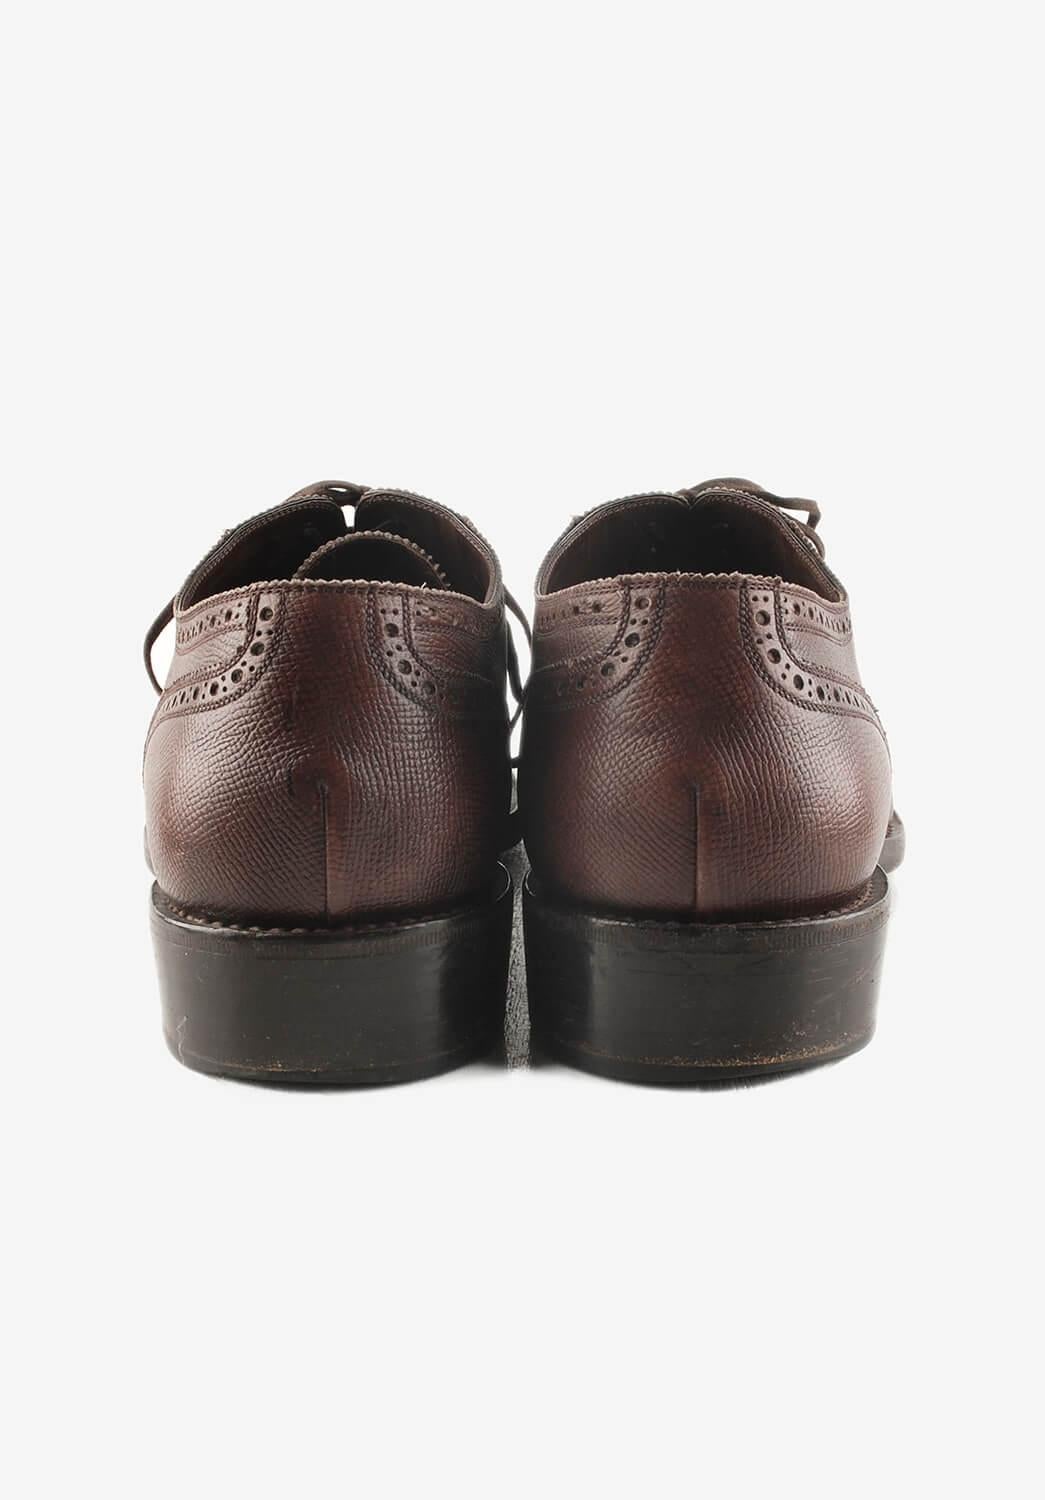 size 15 men's shoes in europe